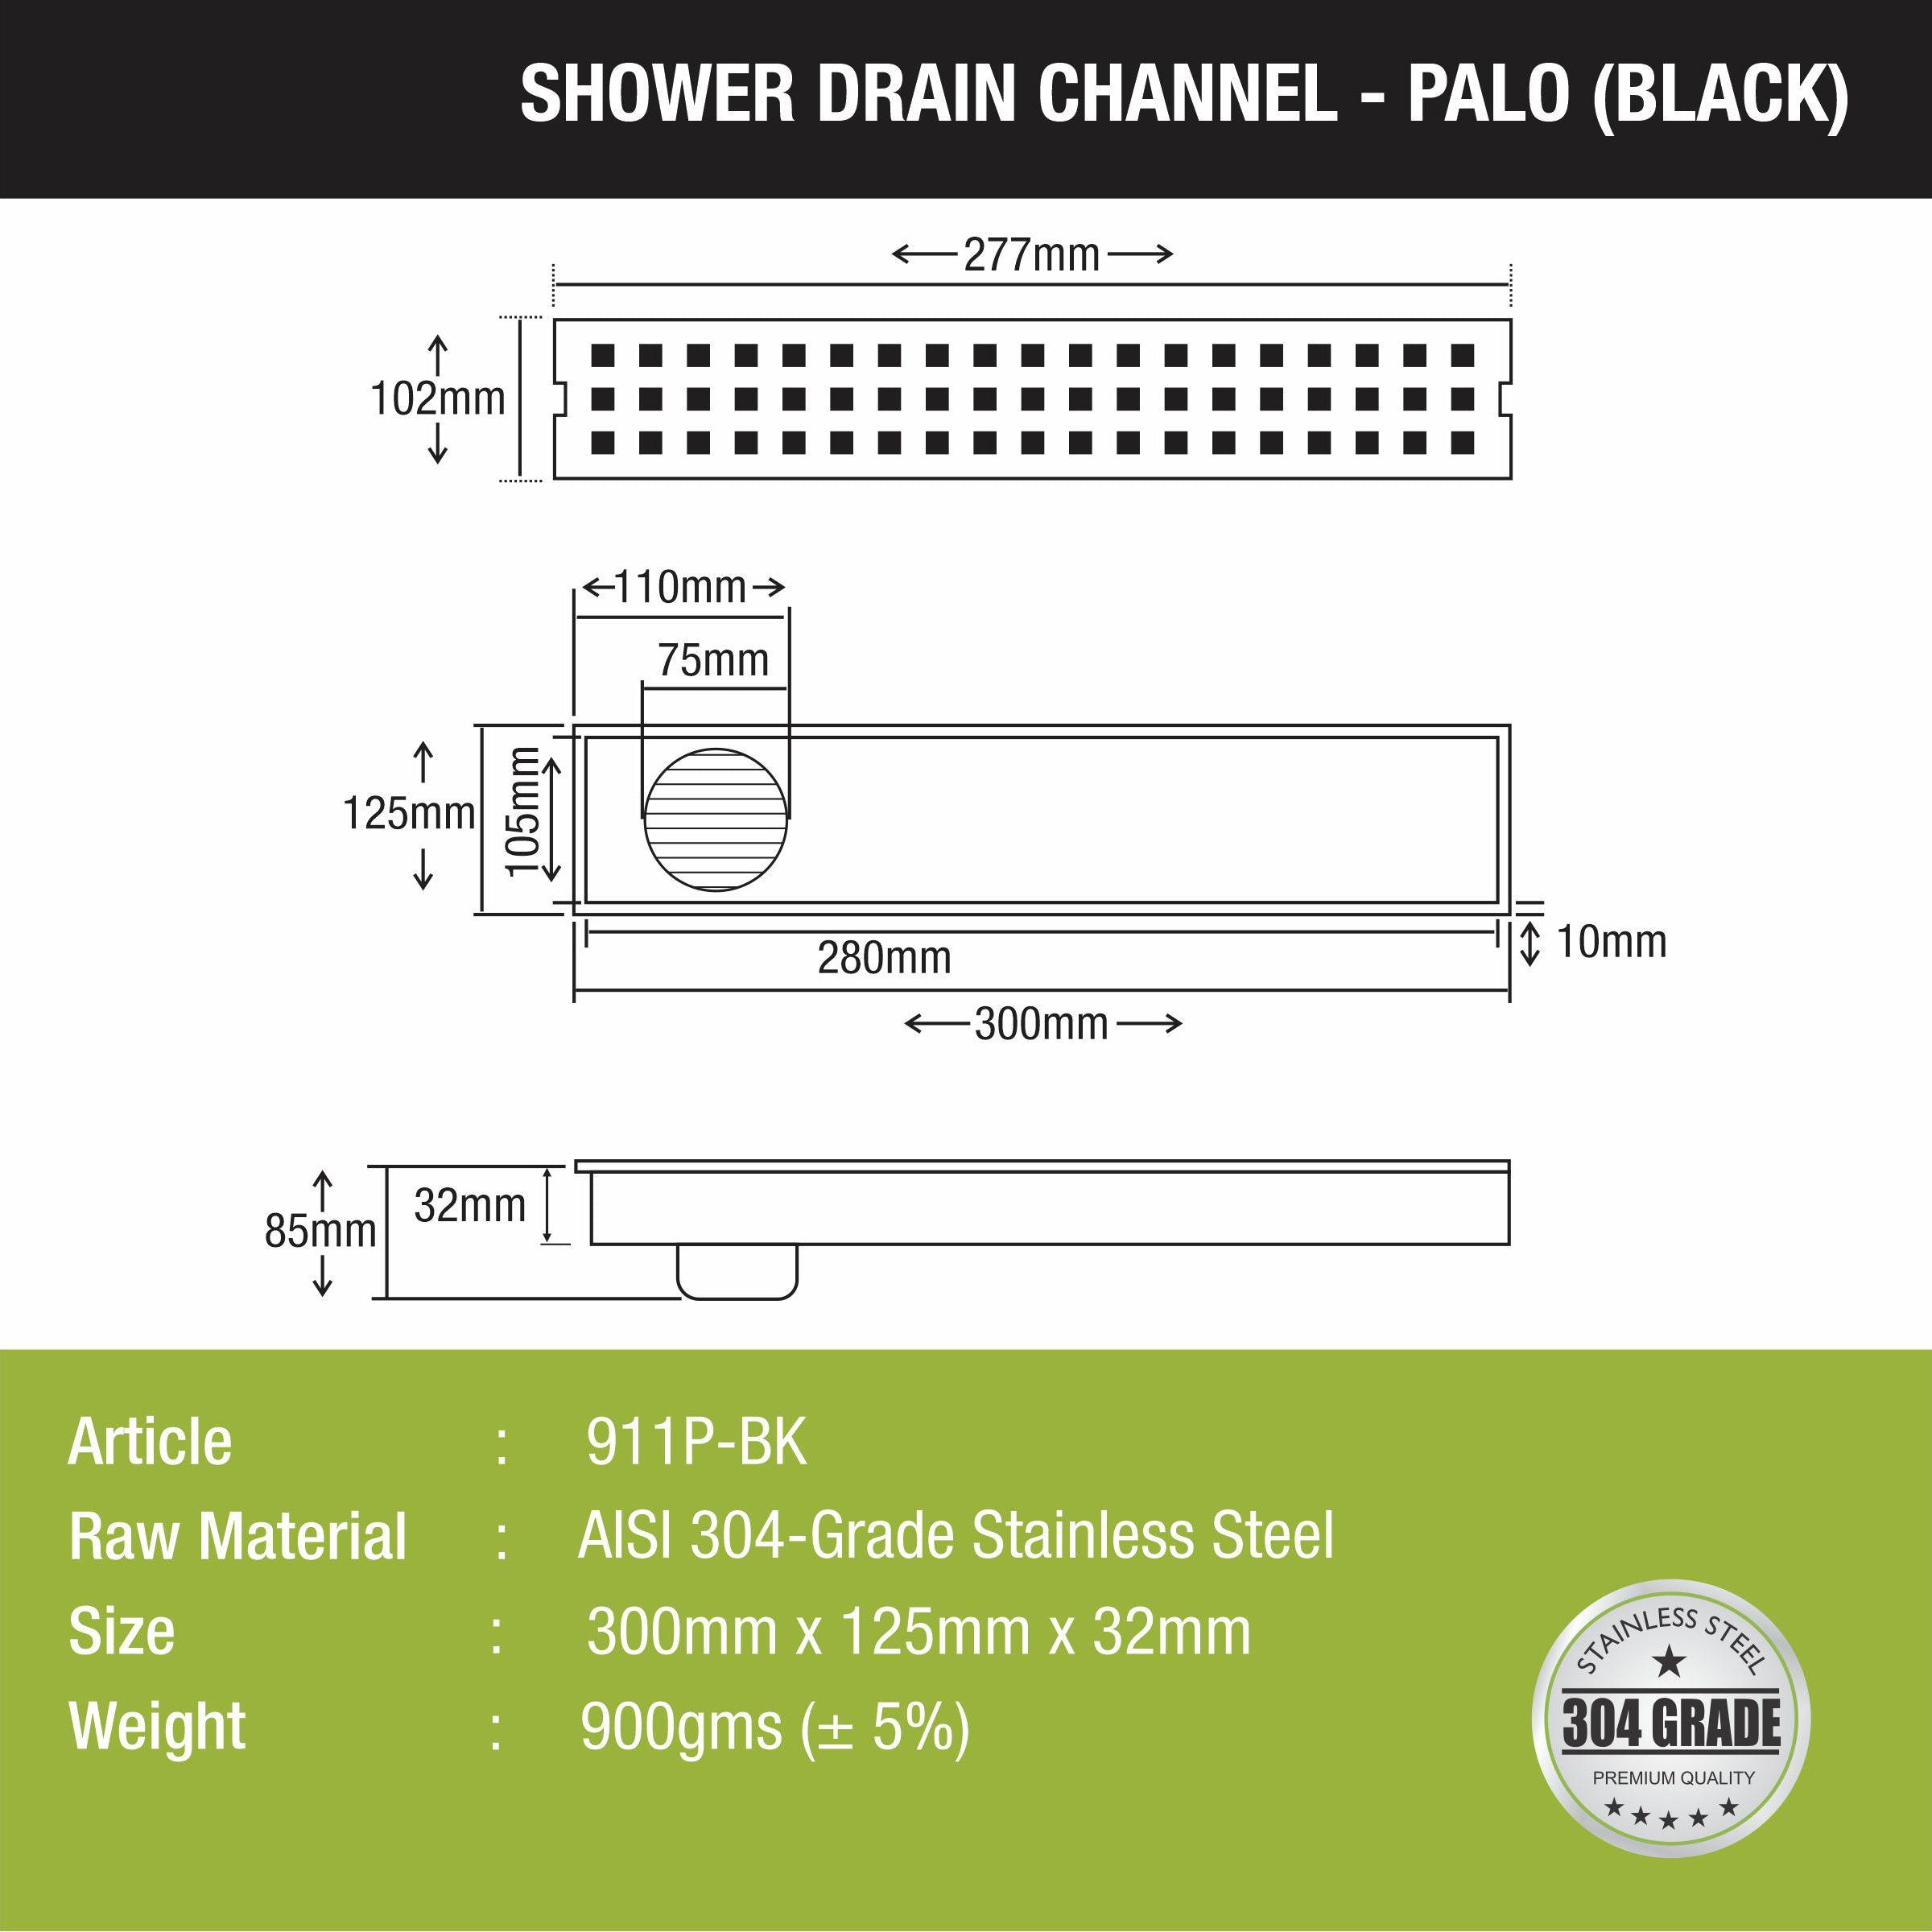 Palo Shower Drain Channel - Black (12 x 5 Inches) size and measurement